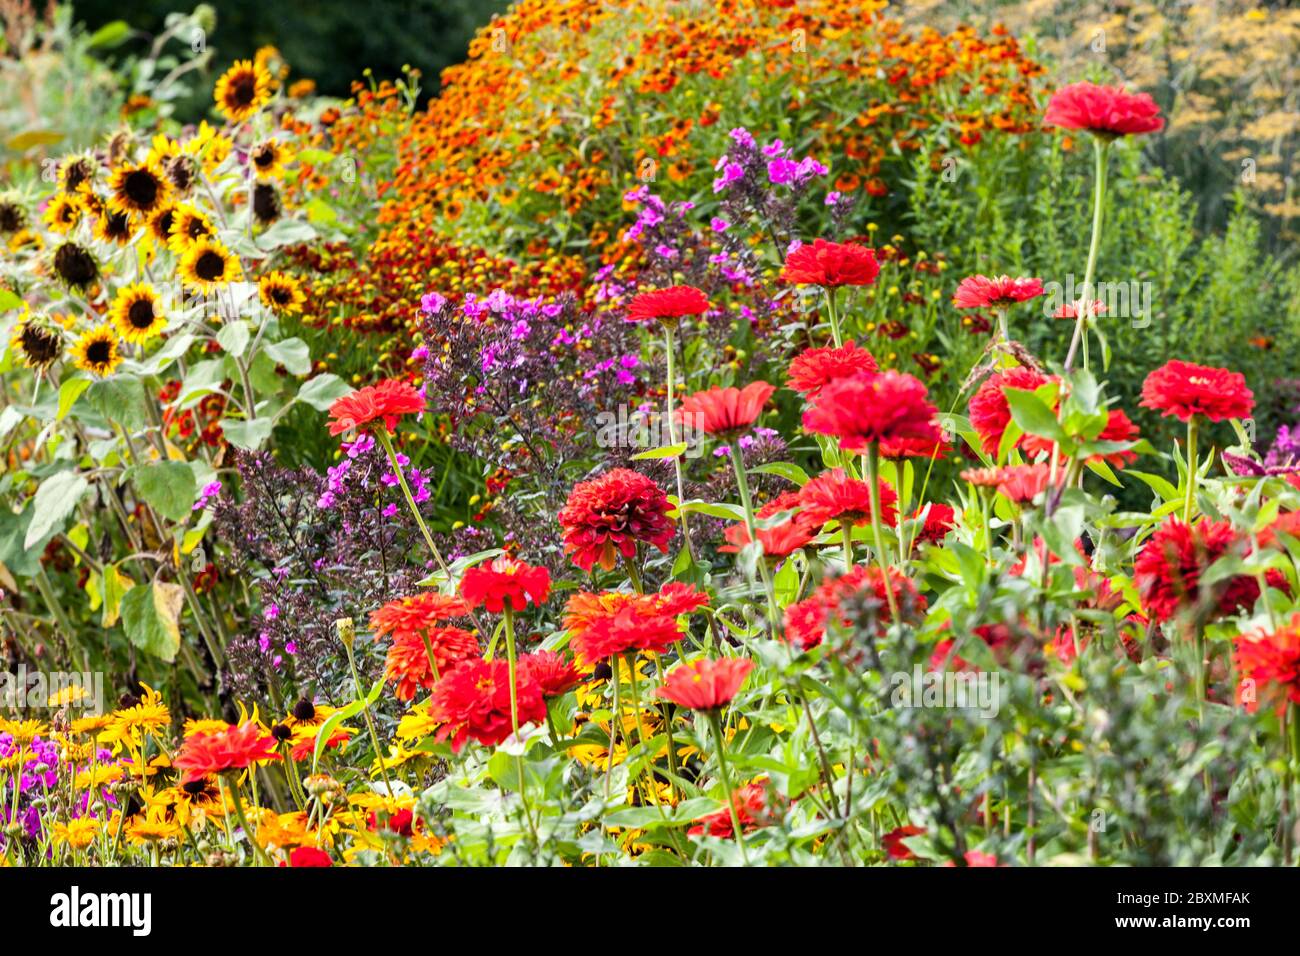 Garden in full bloom, Zinnias Sneezeweeds, Sunflowers, red yellow orange group of flowers mid-summer mixed annual perennial plants in colourful border Stock Photo